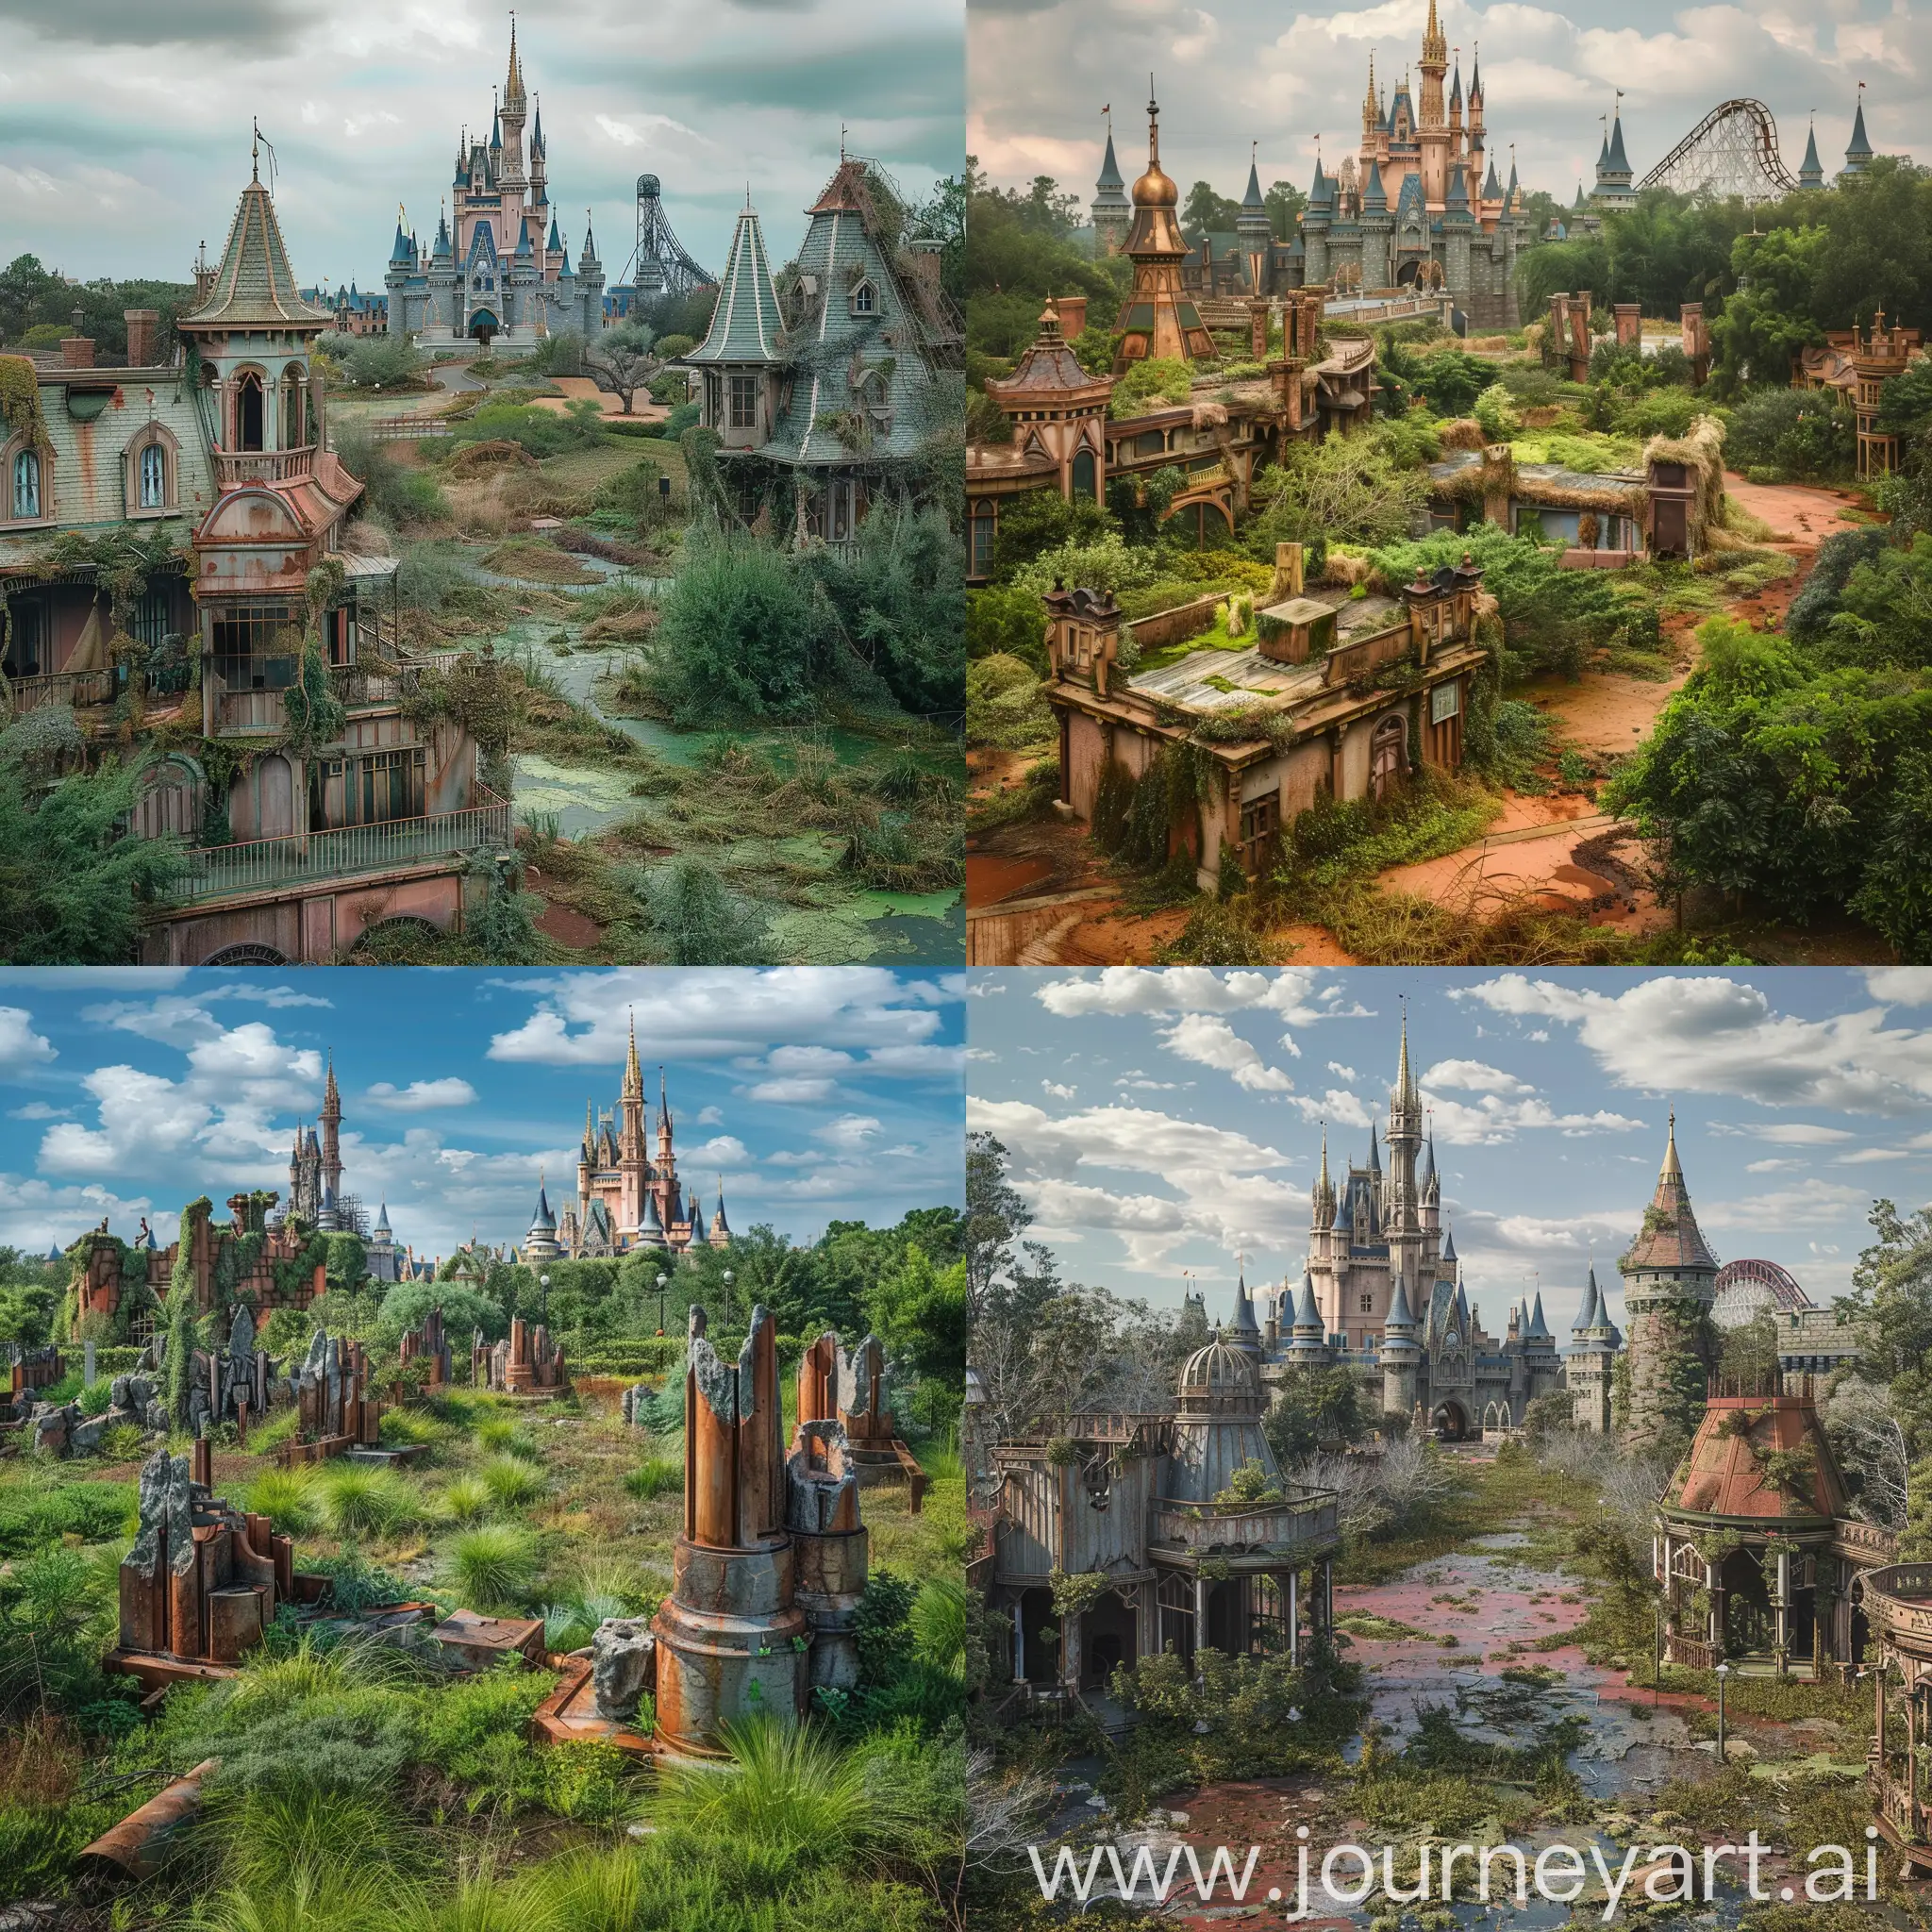 /imagine prompt: Photography of Walt Disney World transformed into a post-apocalyptic wasteland, featuring overgrown, decaying theme park structures engulfed by nature reclaiming its territory. Eerily silent, with rusted remains of iconic attractions like a dilapidated Cinderella Castle and a weathered Space Mountain looming in the background. A desolate landscape where once vibrant colors fade into a hauntingly beautiful desolation, evoking a sense of both nostalgia and desolation.